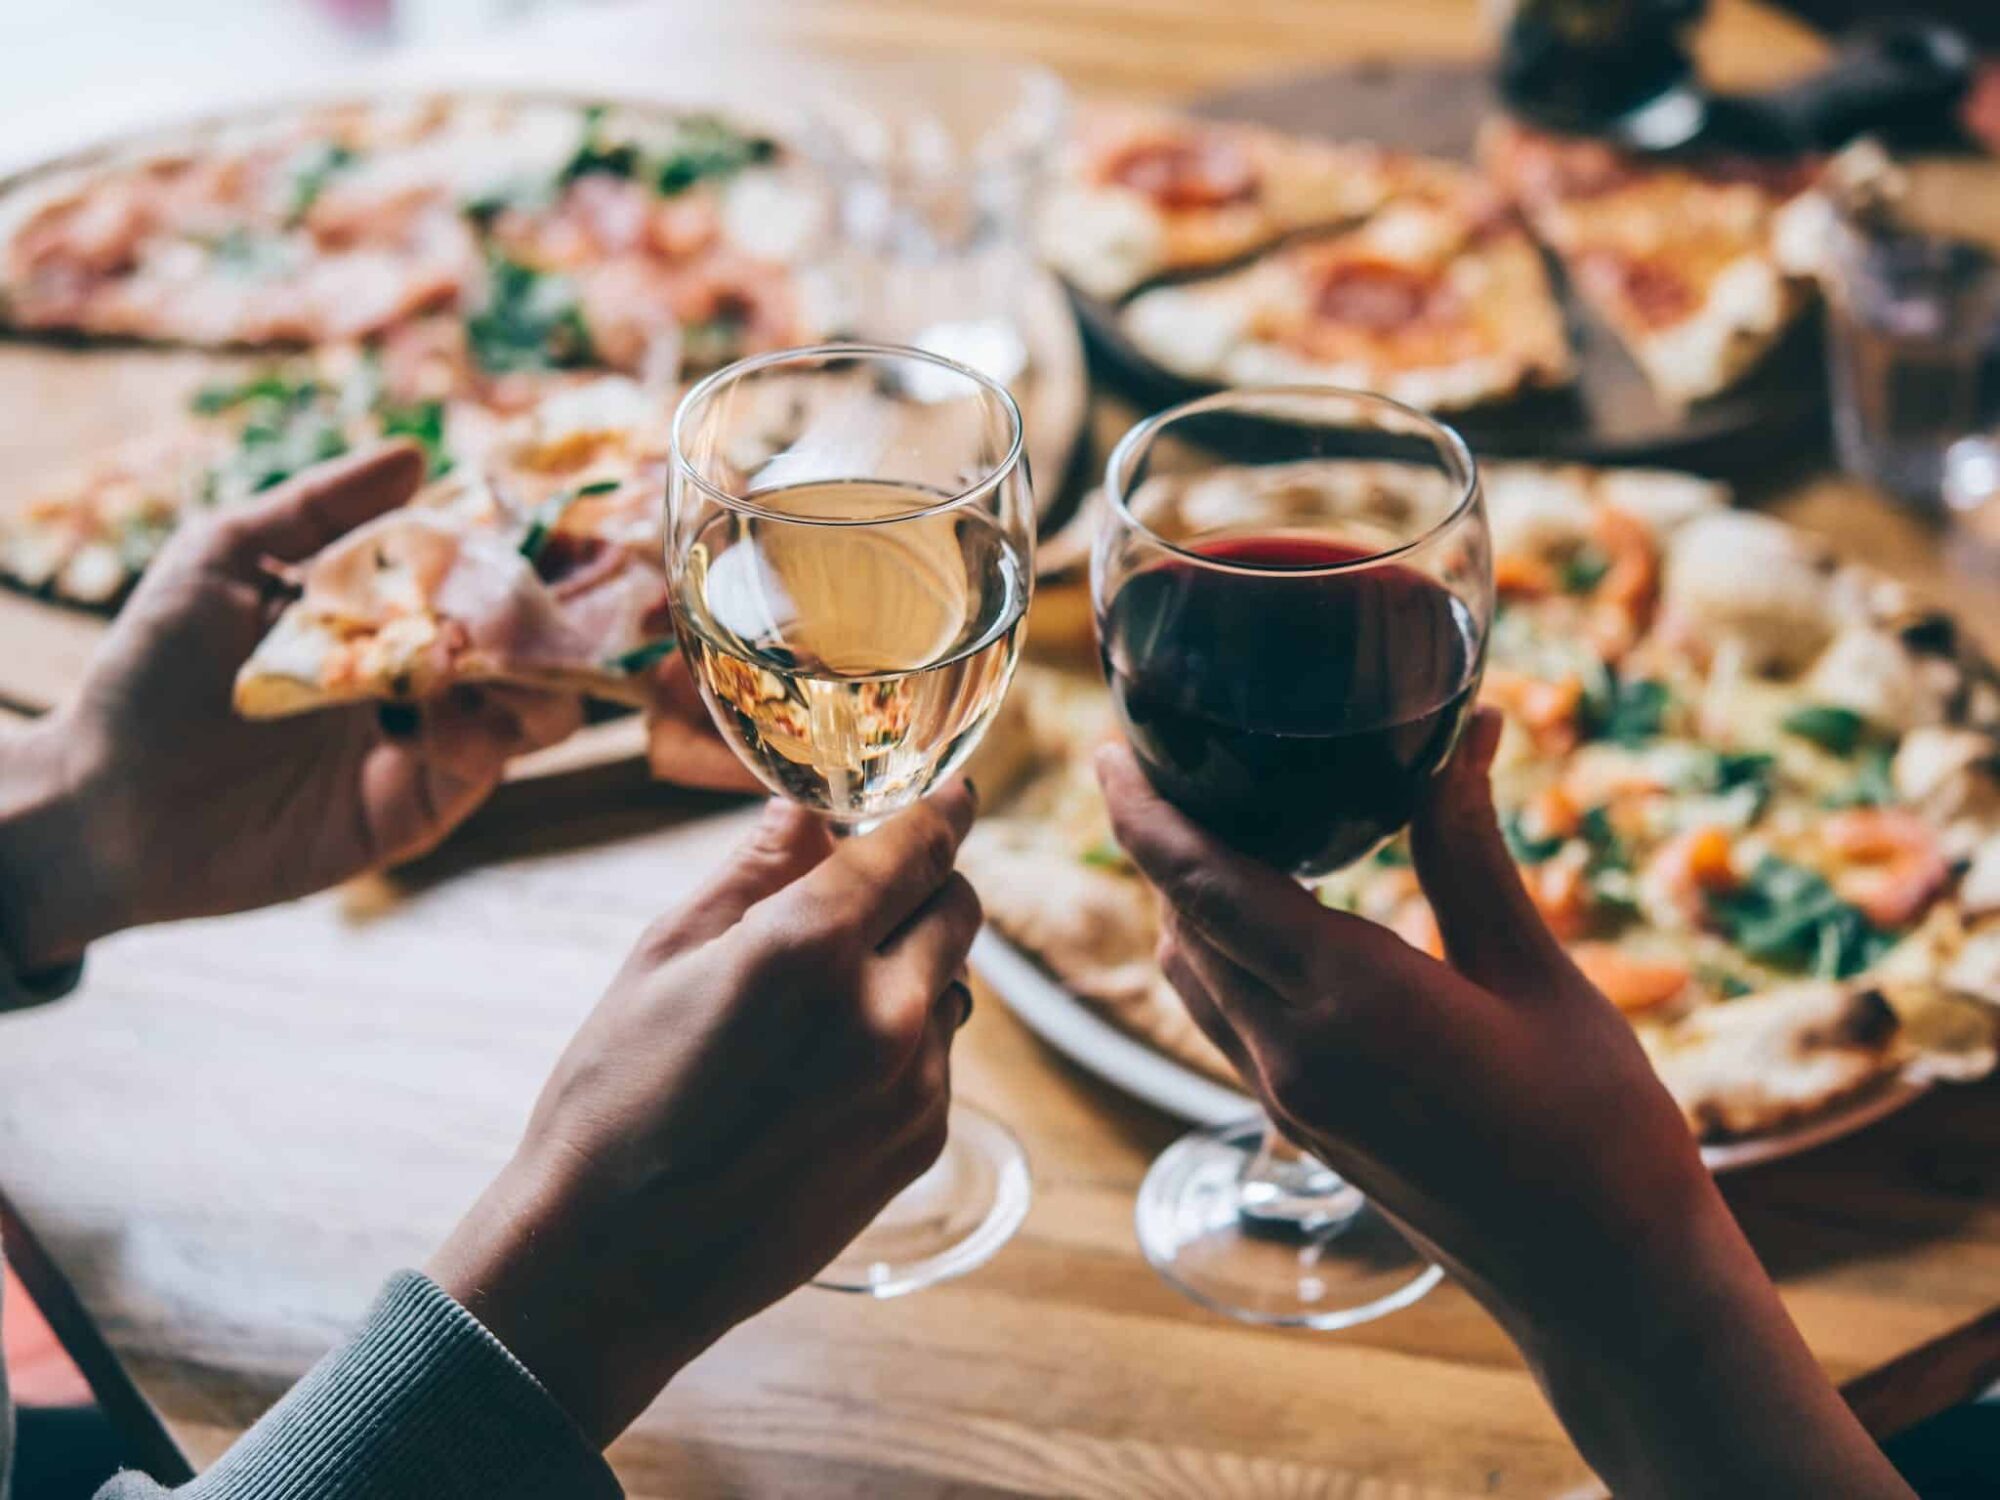 Kevington Hotel offers handmade Woodfired Pizza and a selection of regional wines